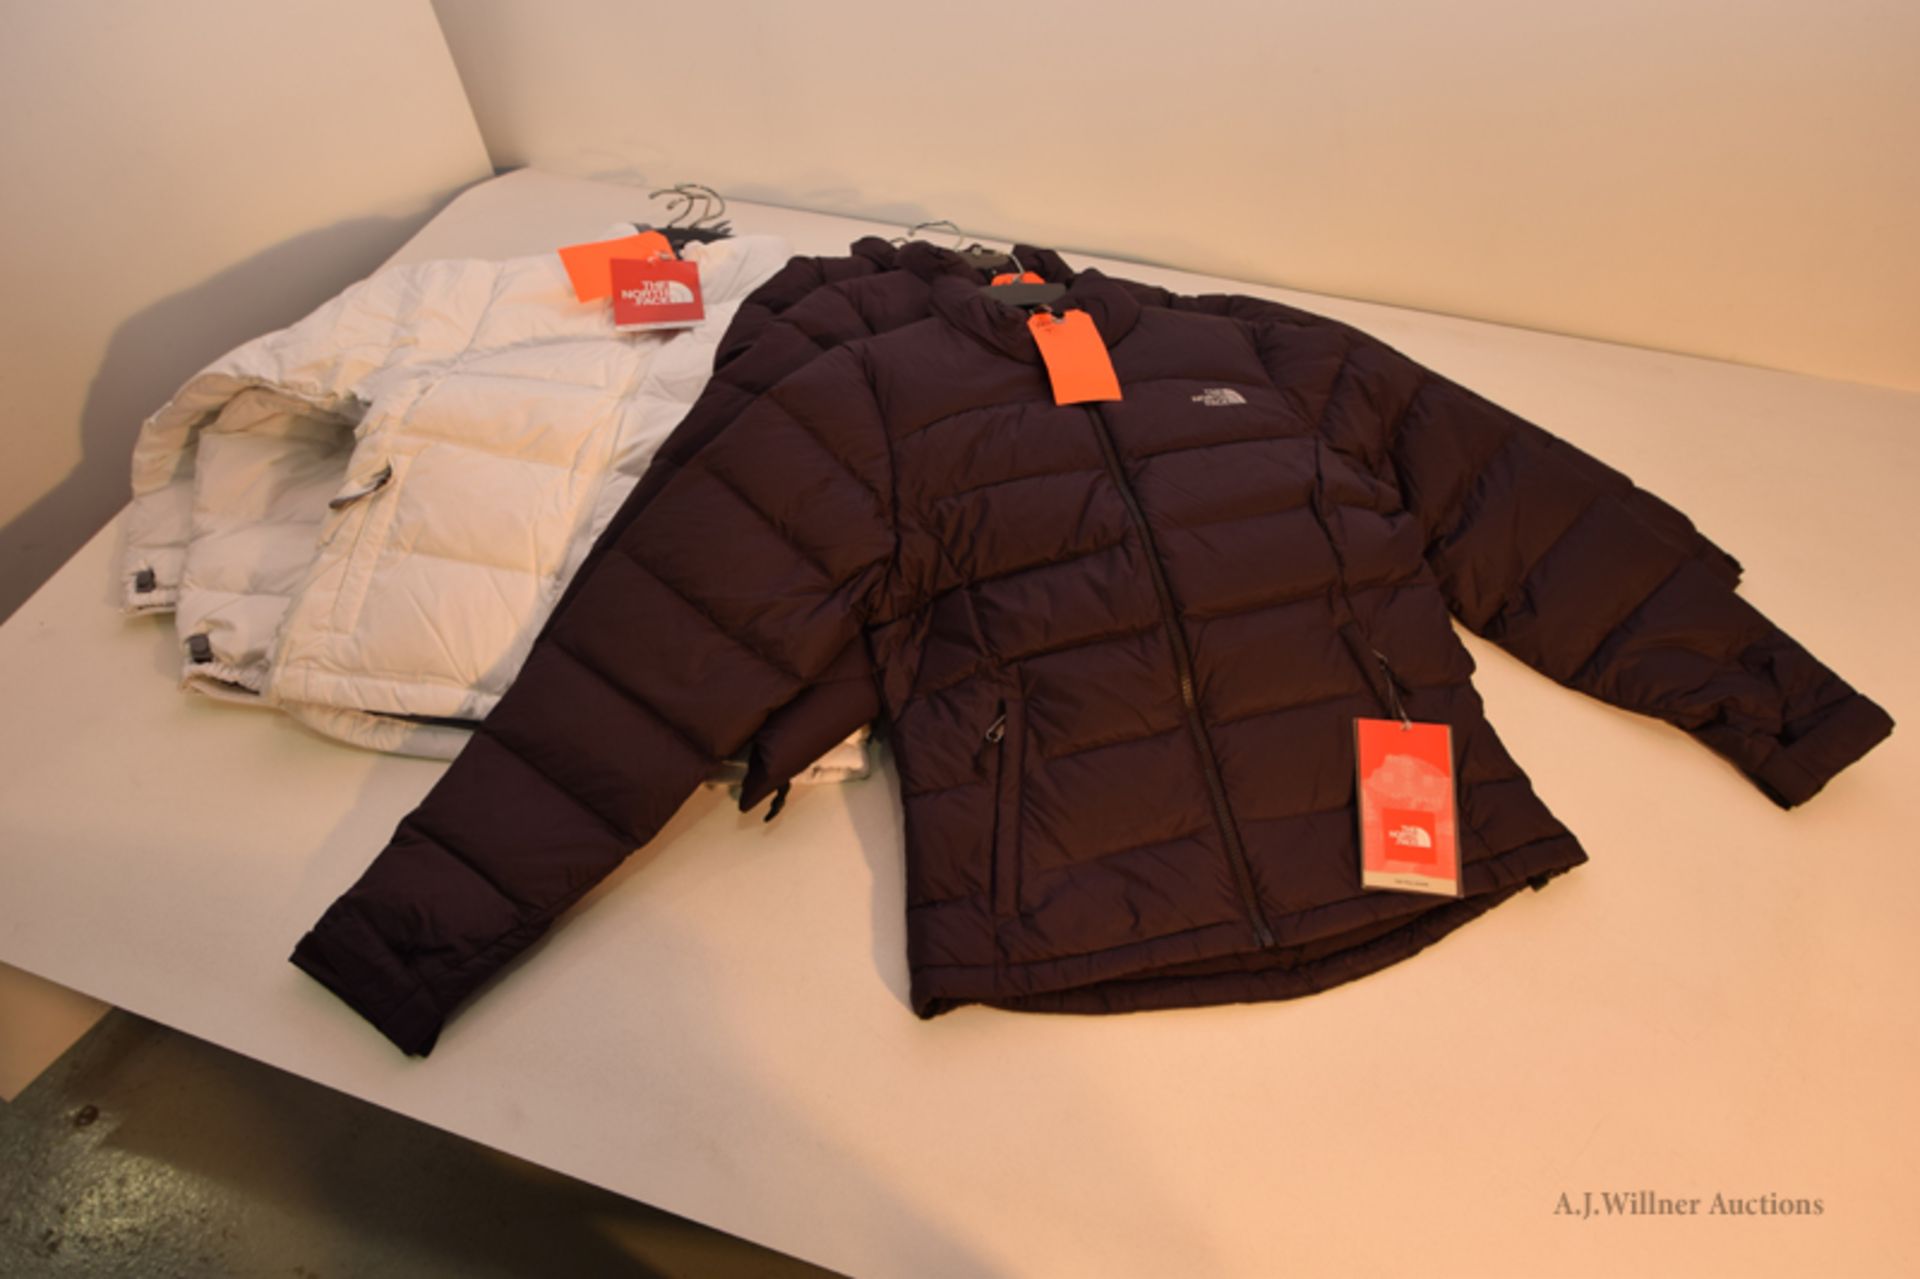 The North Face Clothing - Image 5 of 6